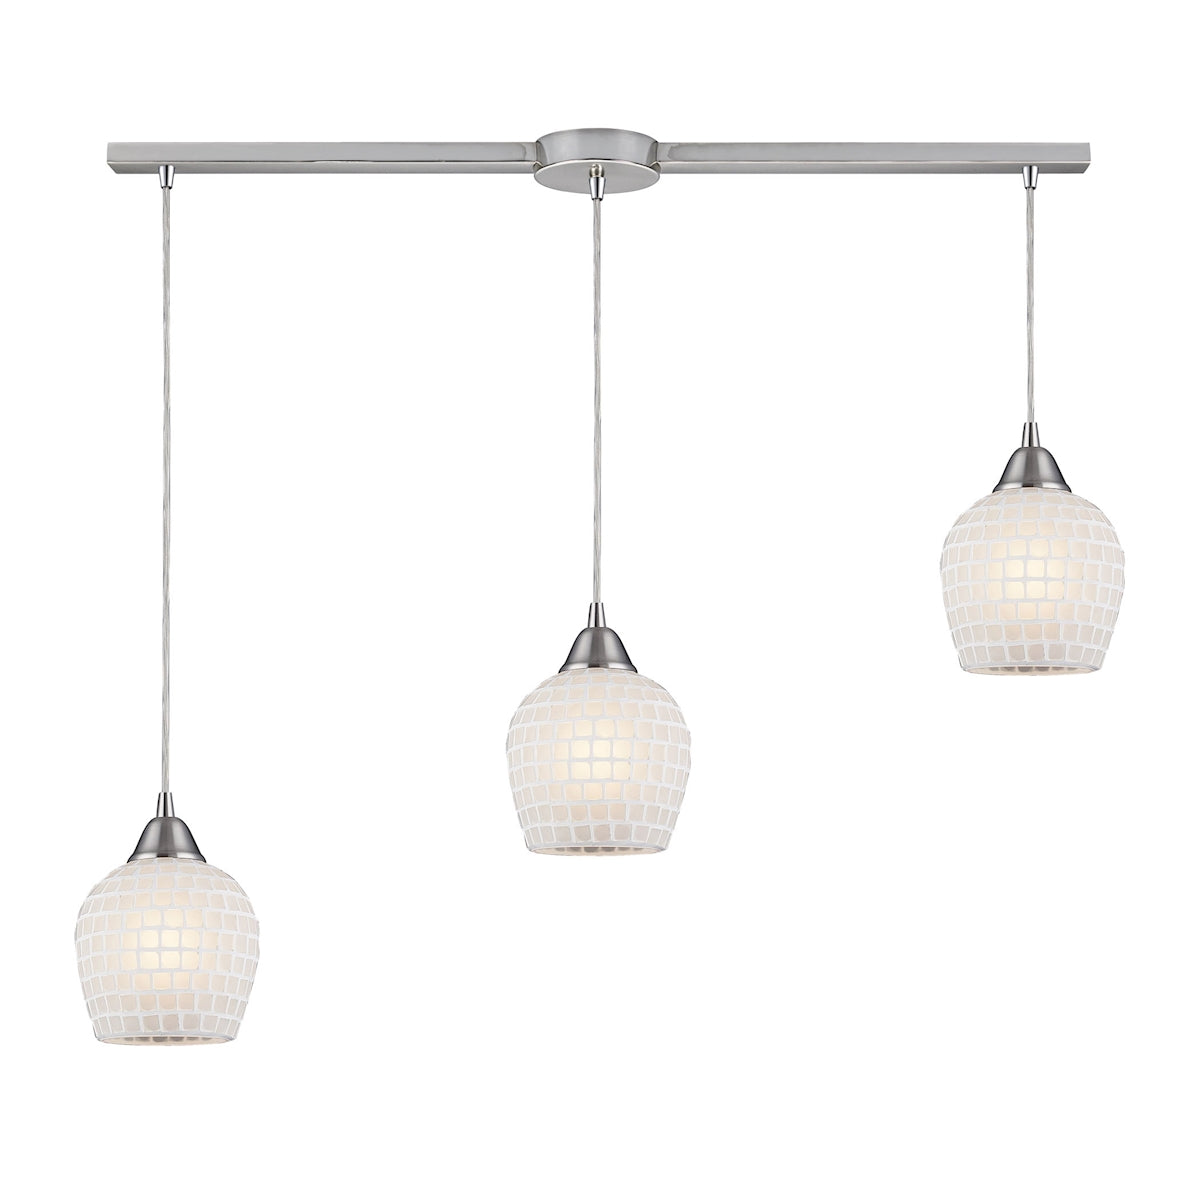 ELK Lighting 528-3L-WHT Fusion 3-Light Linear Pendant Fixture in Satin Nickel with White Mosaic Glass